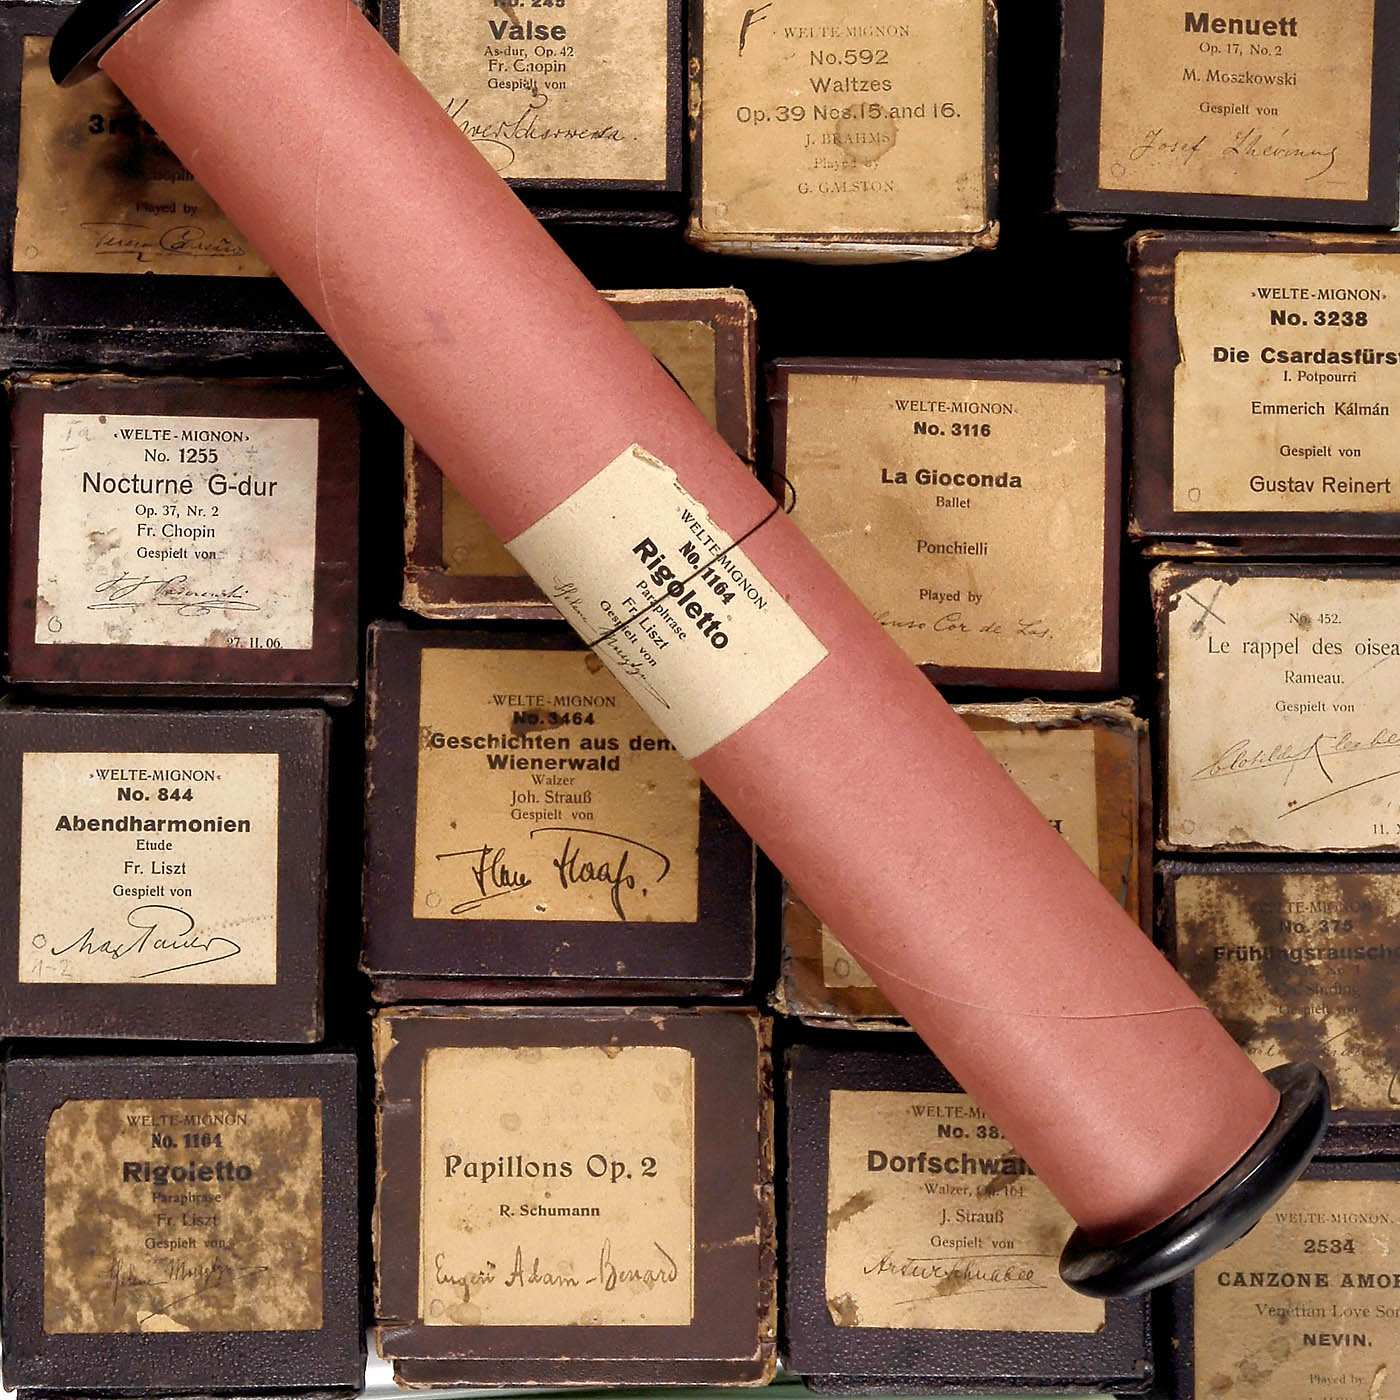 51 Welte-Mignon Reproducing Piano Rolls (Red), 1905 onwards - Image 8 of 8